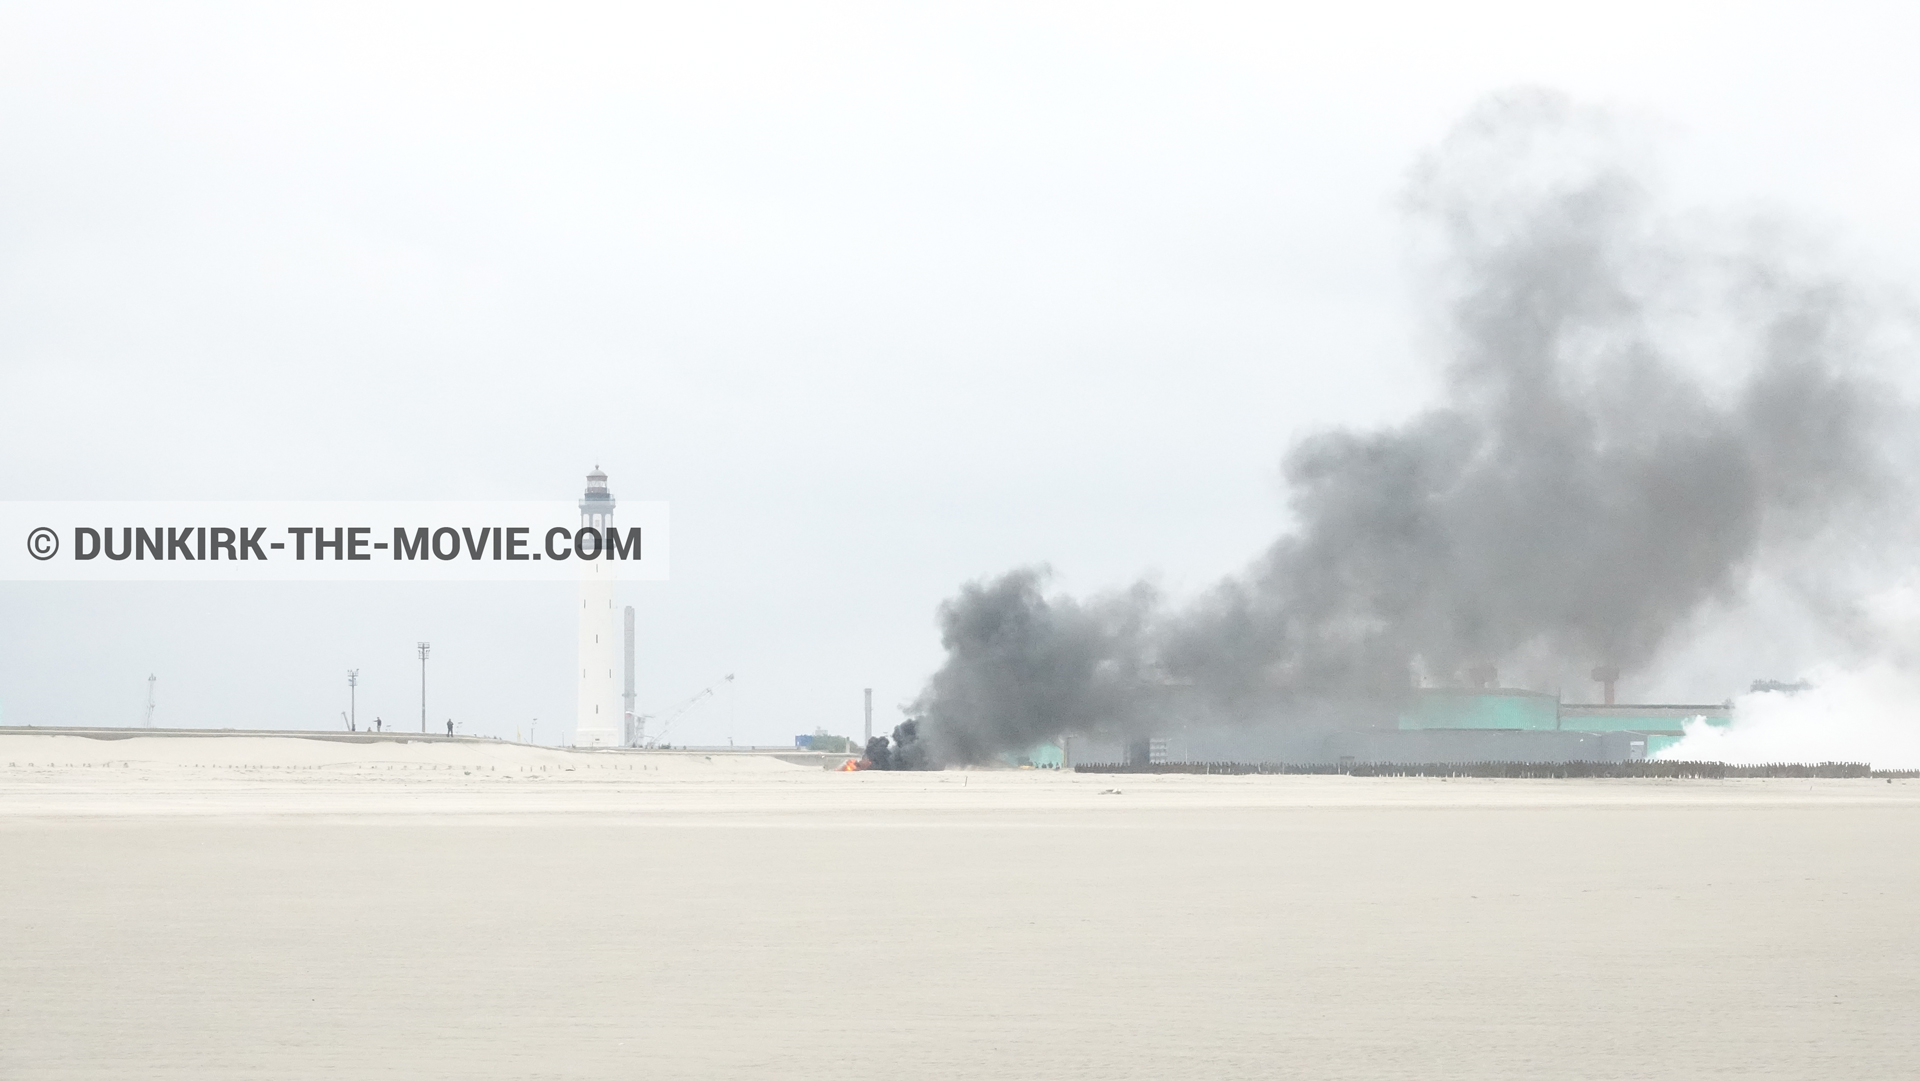 Picture with grey sky, black smoke, Dunkirk lighthouse, beach,  from behind the scene of the Dunkirk movie by Nolan